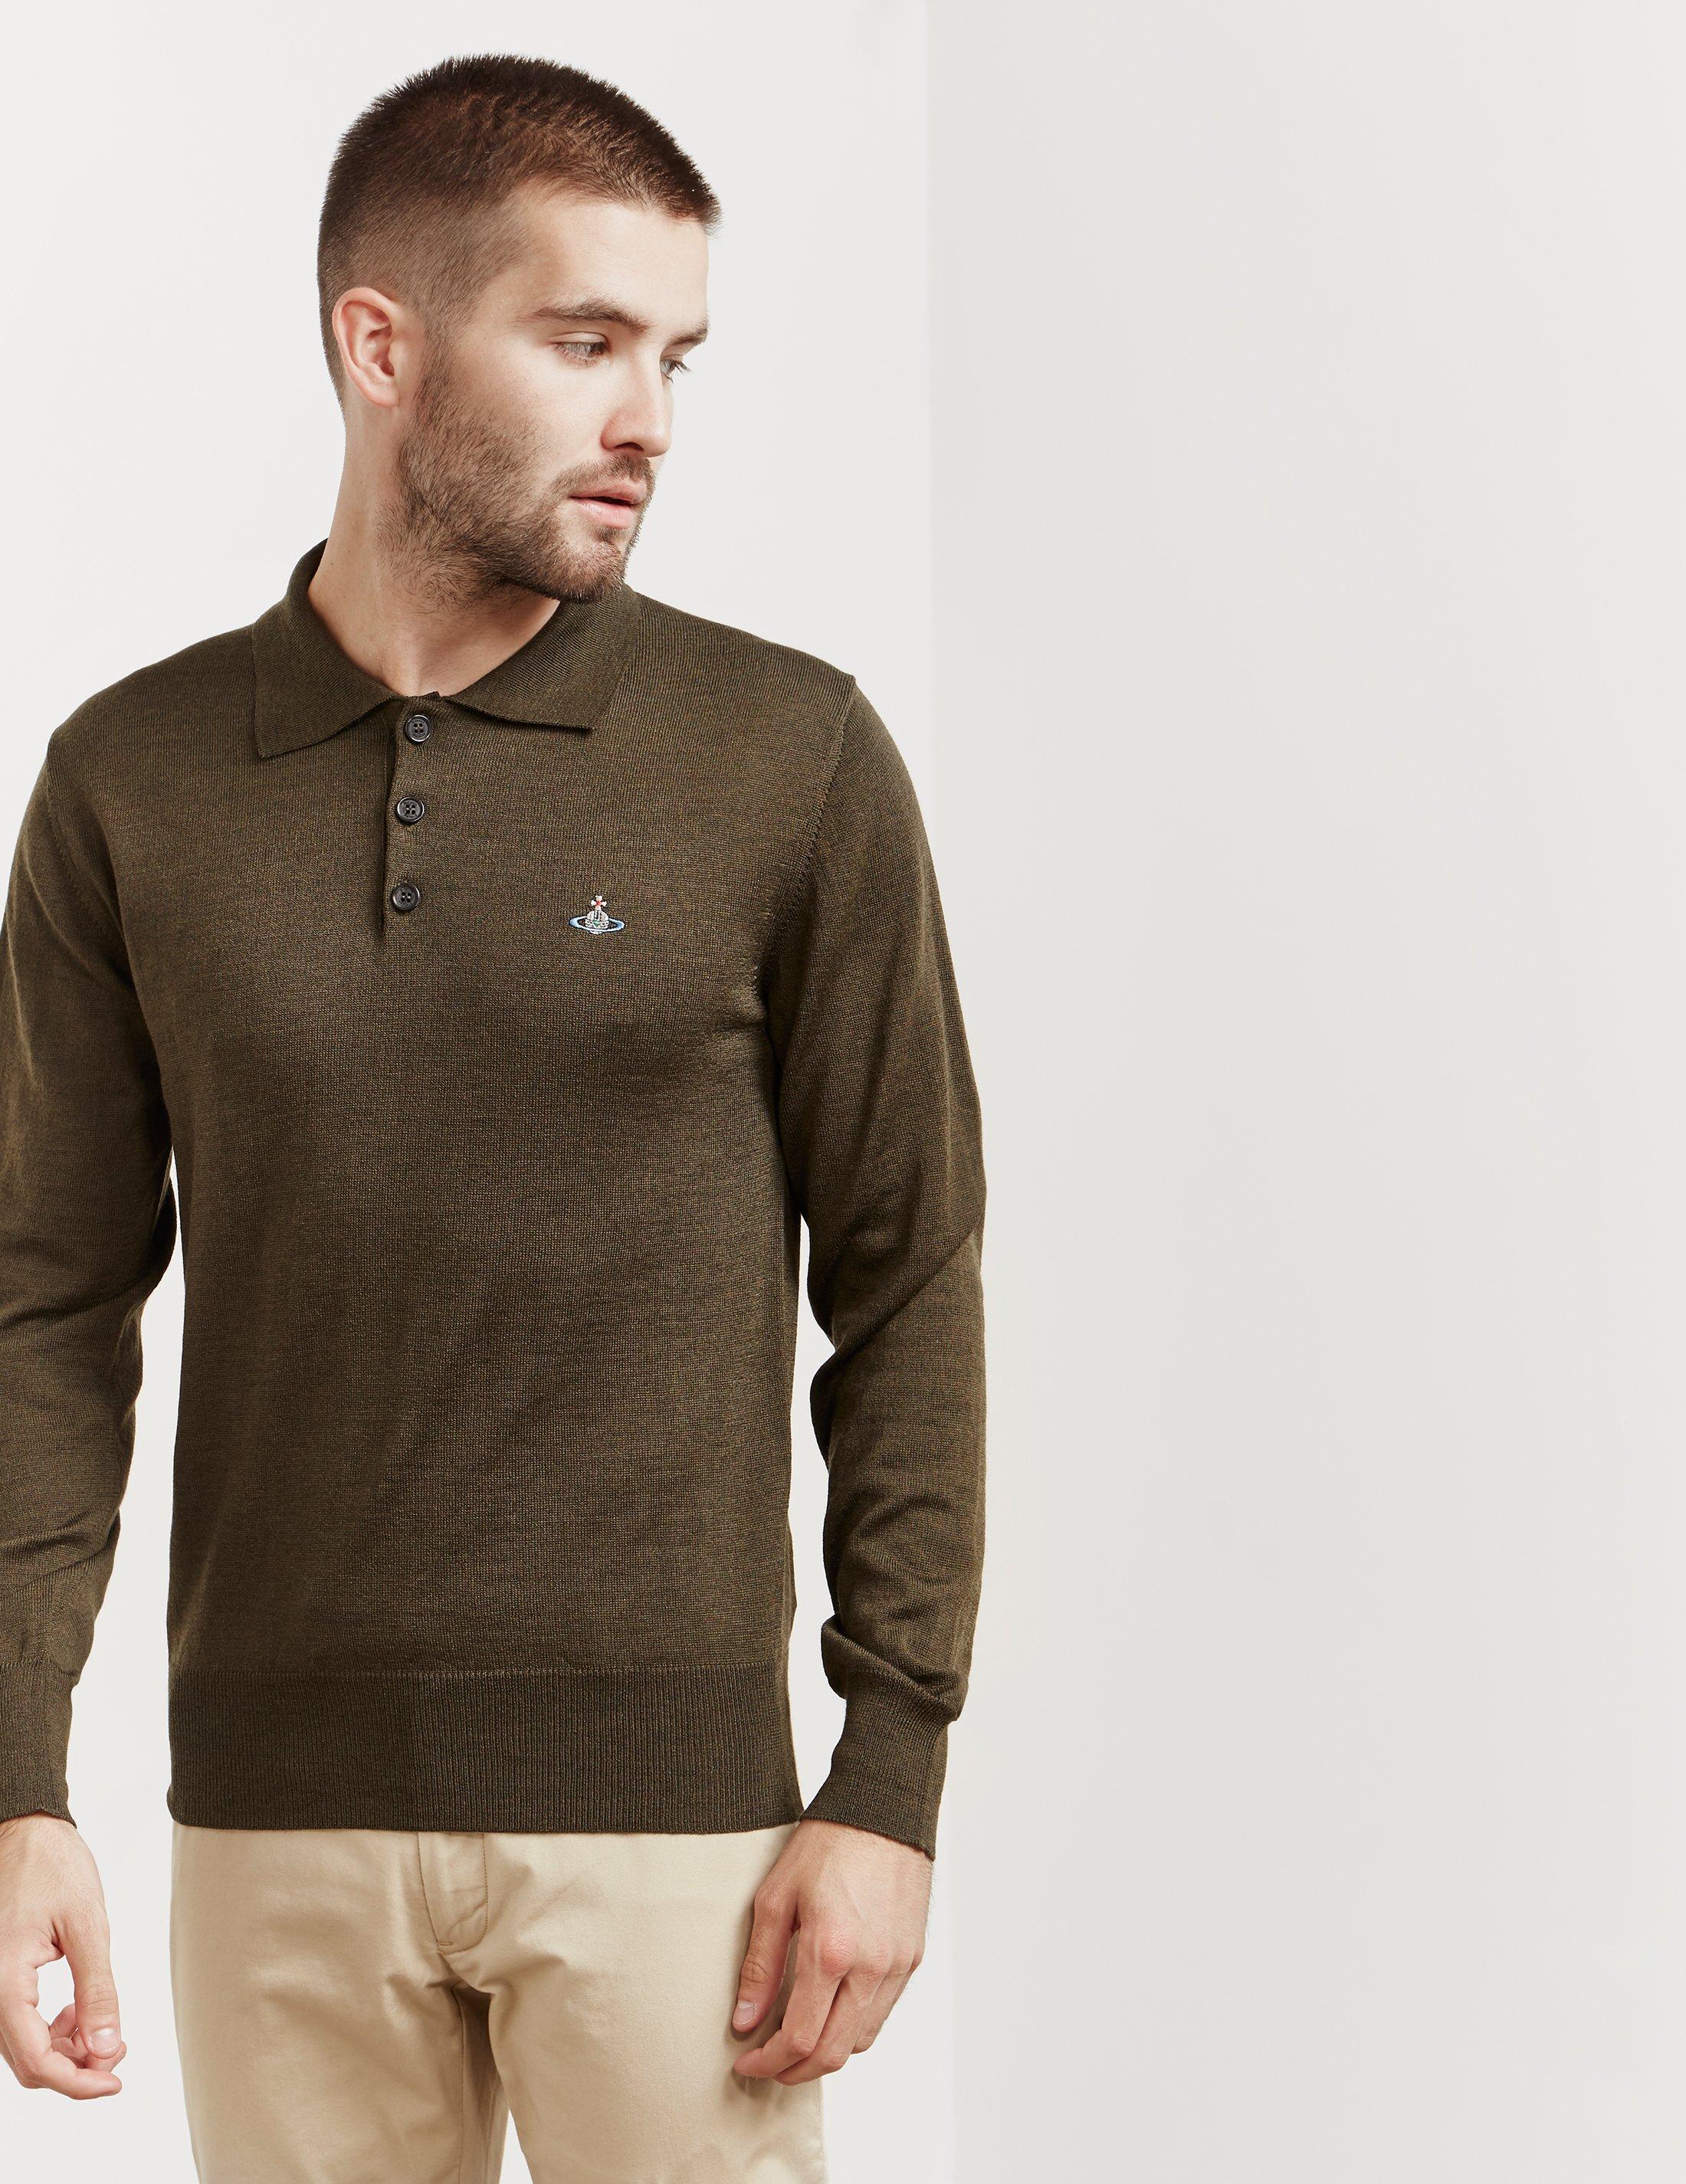 Buy > mens knitted polo long sleeve > in stock